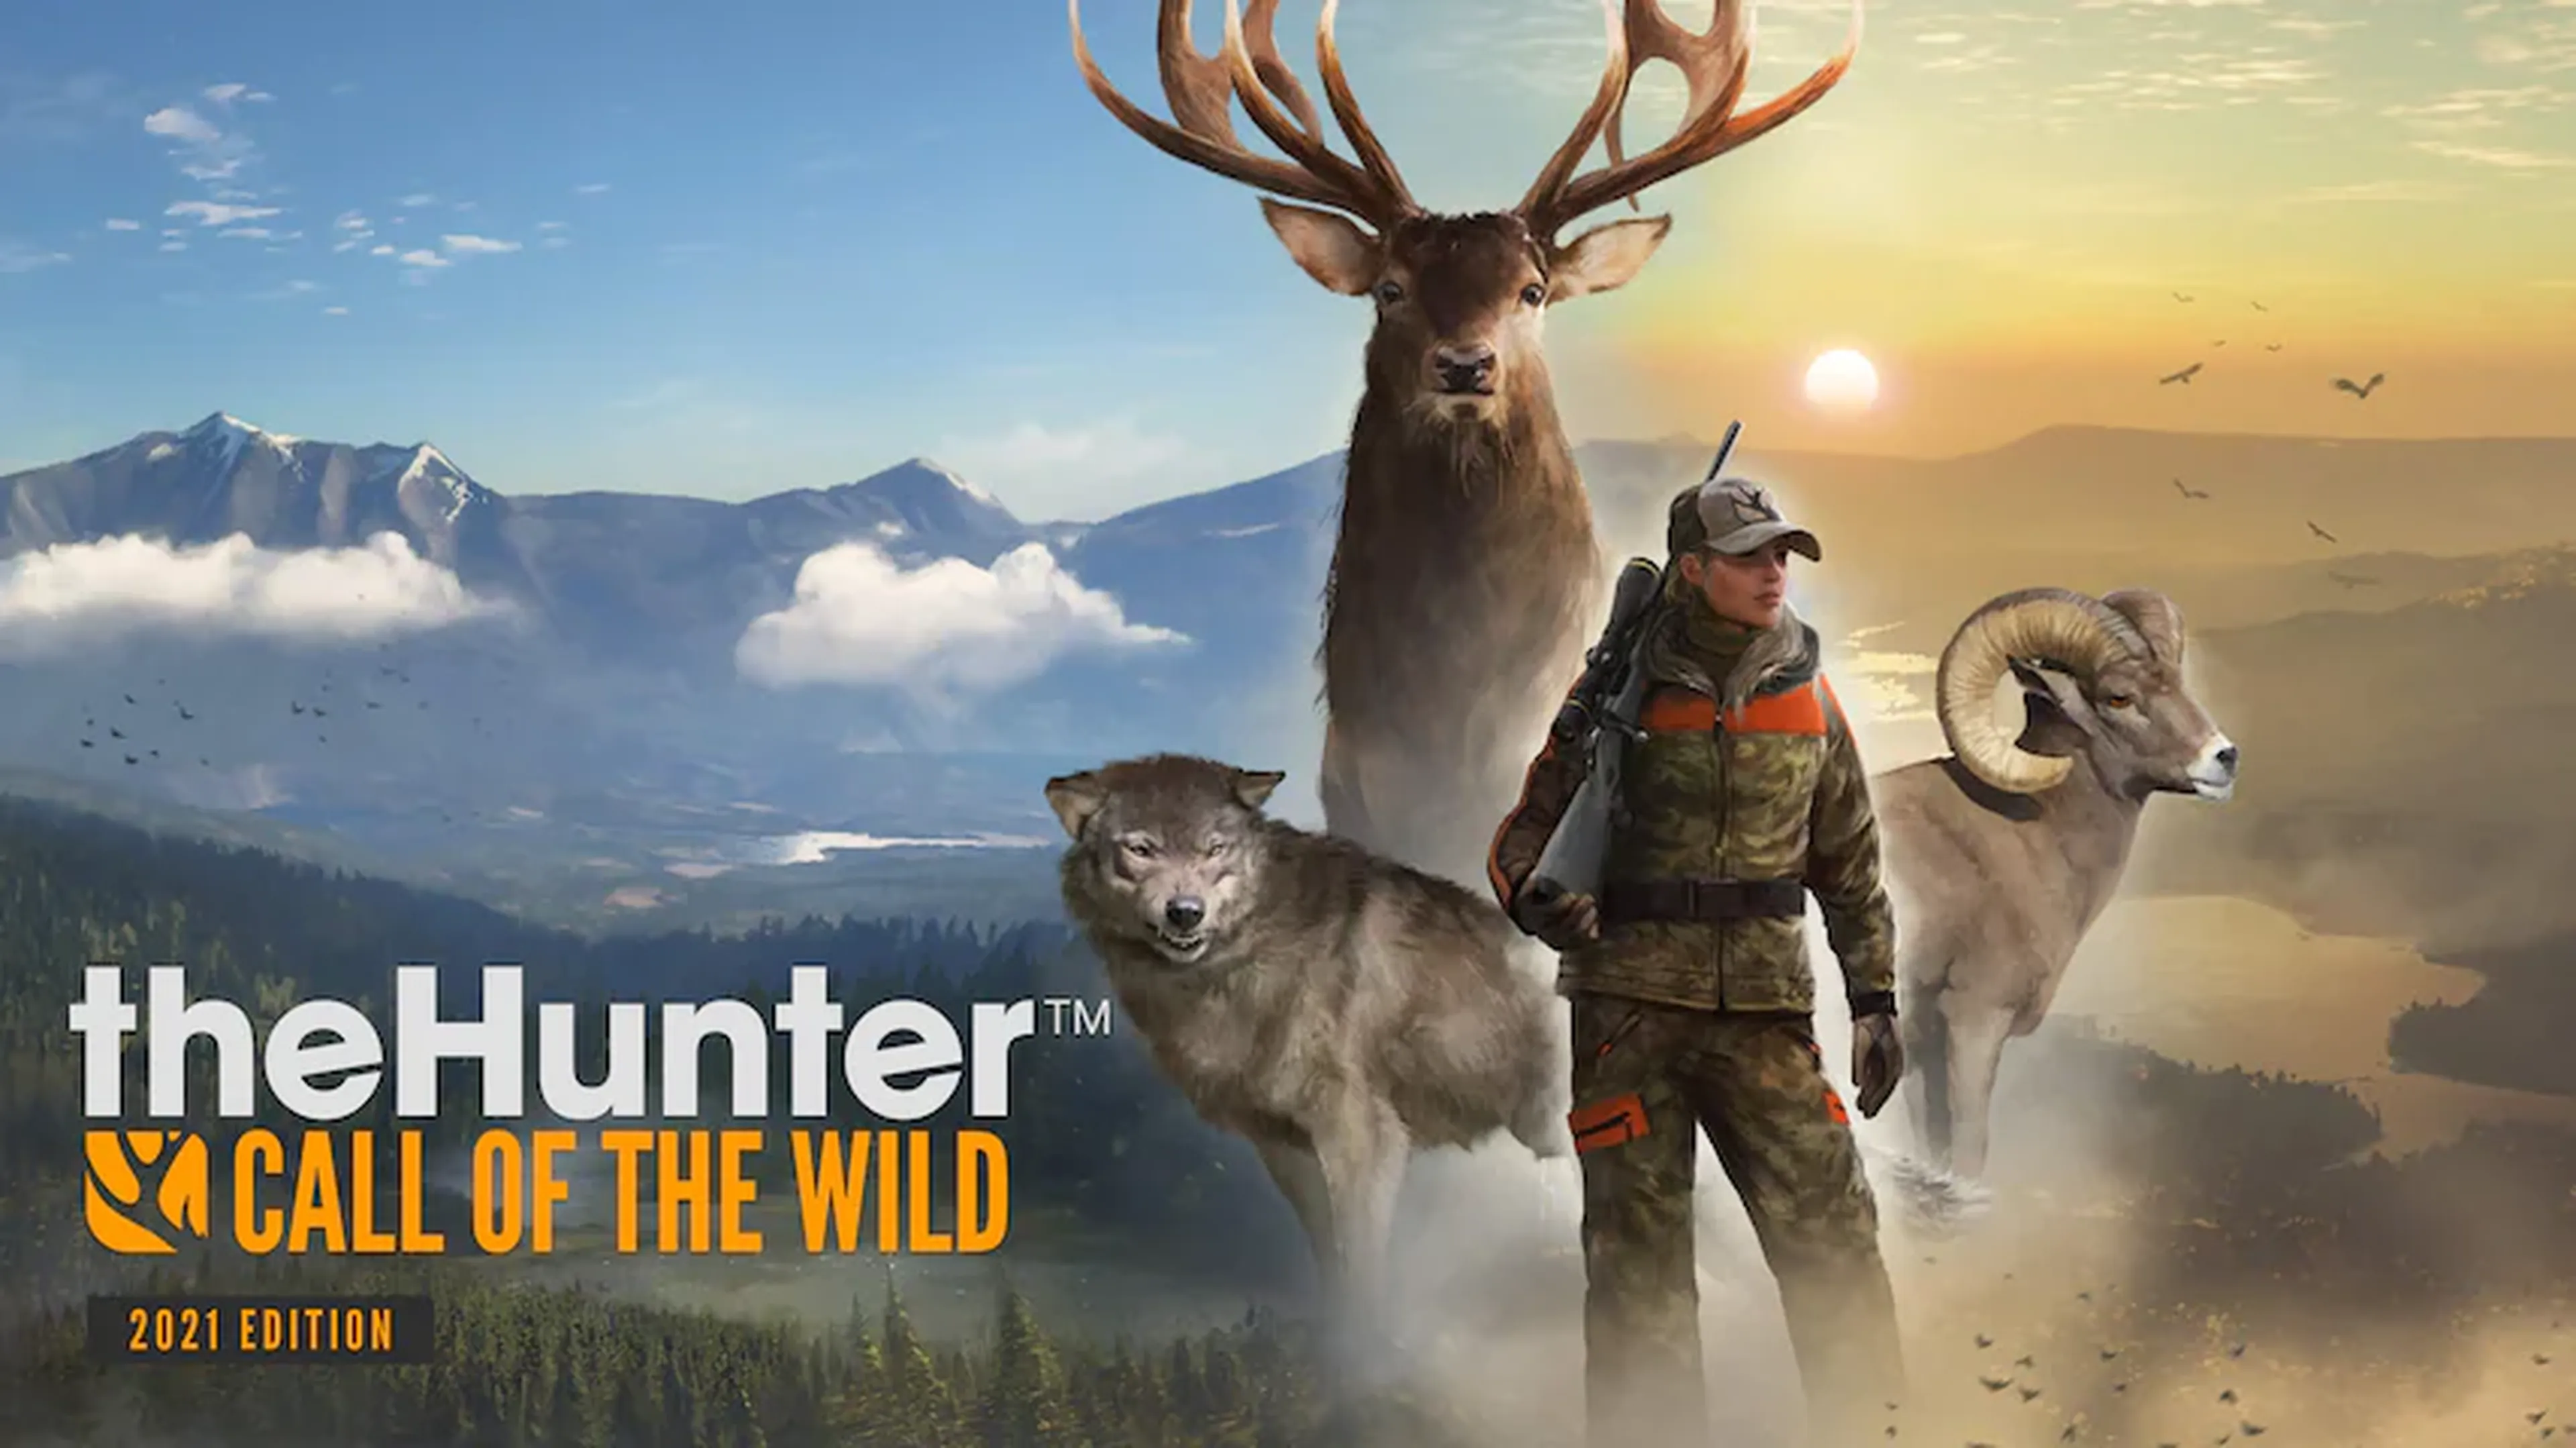 Thehunter. Игра the Hunter Call of the Wild. Игра охота the Hunter Call of the Wild. The Hunter Call of the Wild обложка. The Hunter Call of the Wild обои.